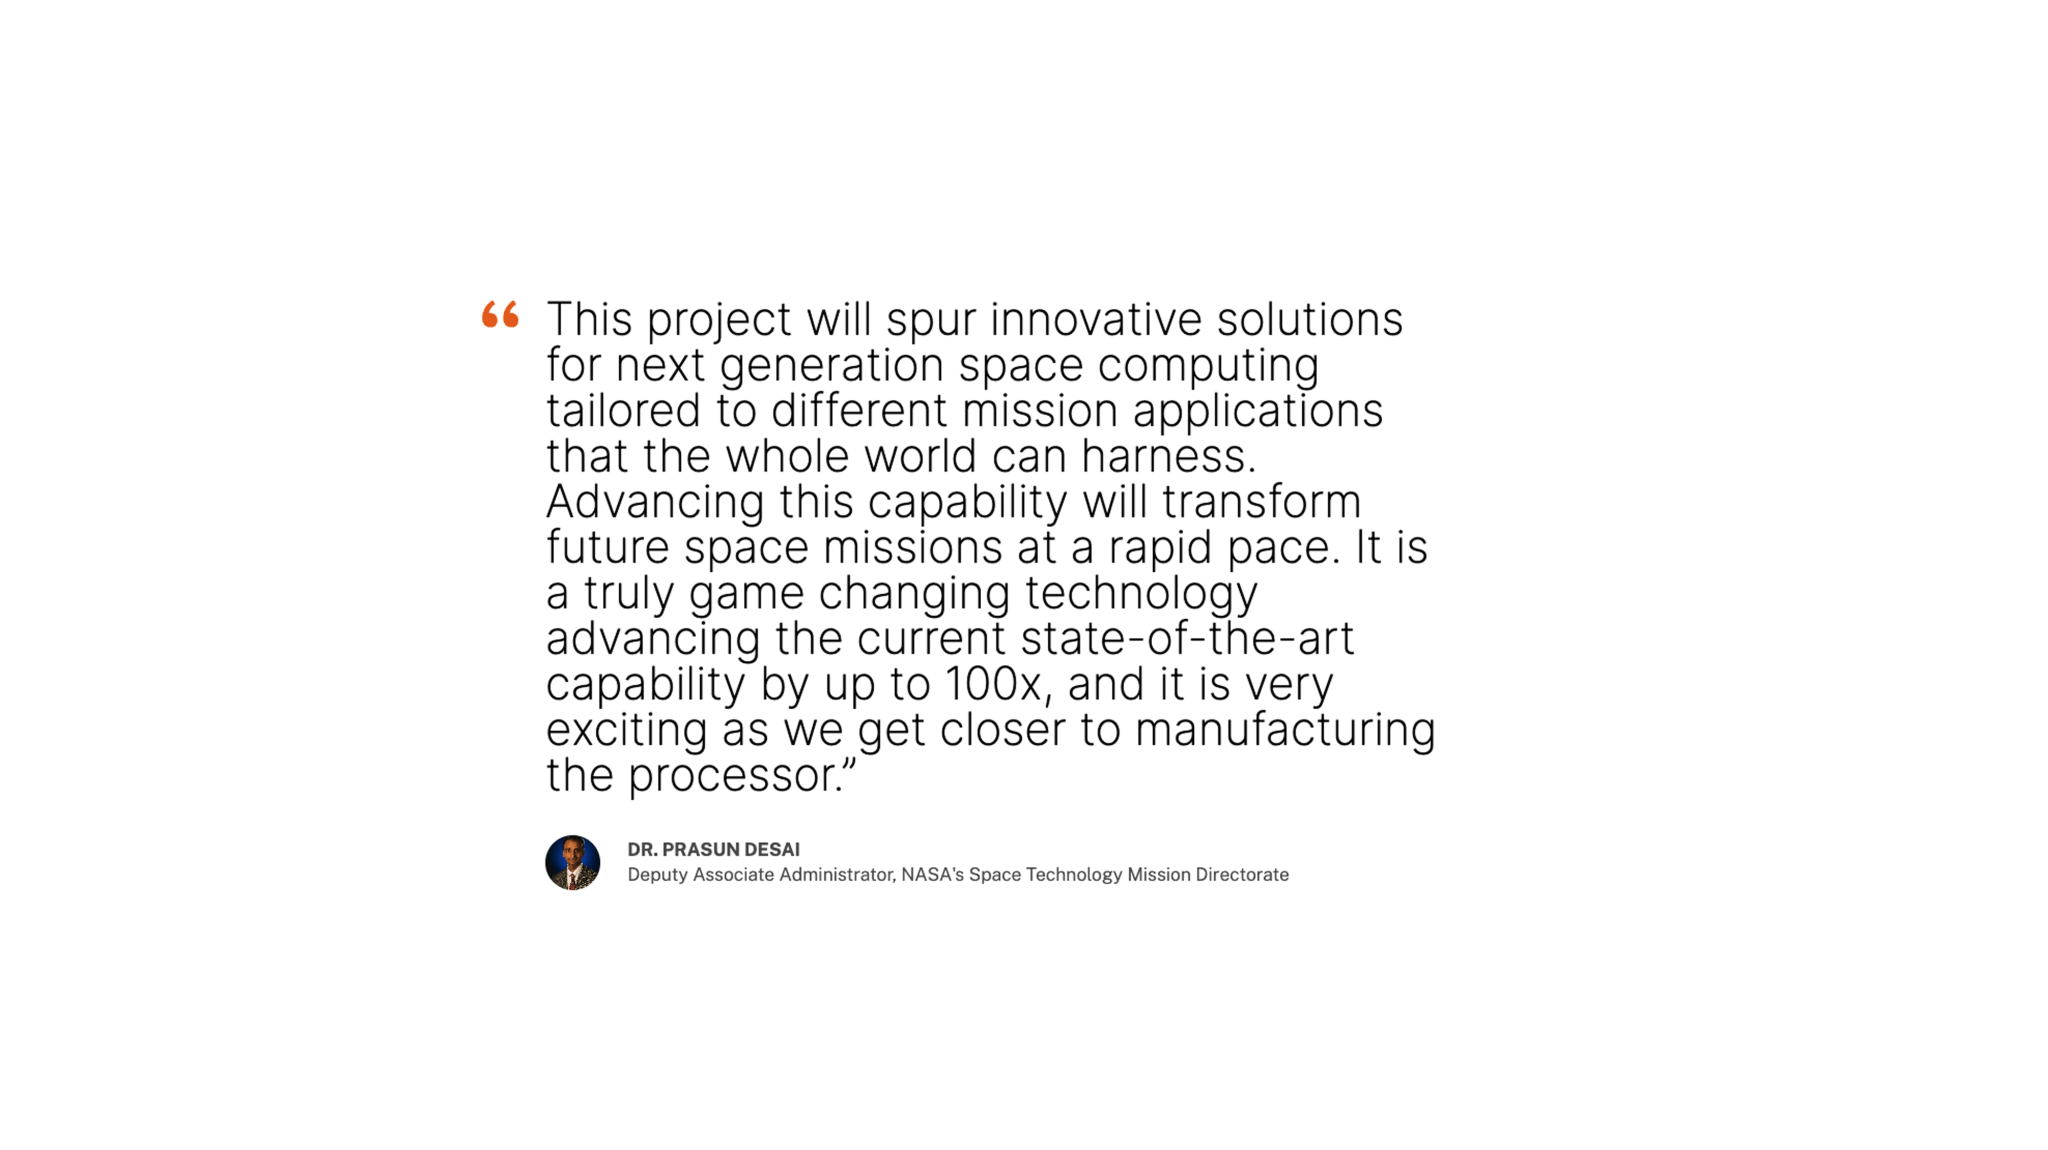 Quote about High Performance Spaceflight Computing by Dr. Prasun Desai, Deputy Administrator for NASA STMD: “This project will spur innovative solutions for next generation space computing tailored to different mission applications that the whole world can harness. Advancing this capability will transform future space missions at a rapid pace. It is a truly game changing technology advancing the current state-of-the-art capability by up to 100x, and it is very exciting as we get closer to manufacturing the processor.”